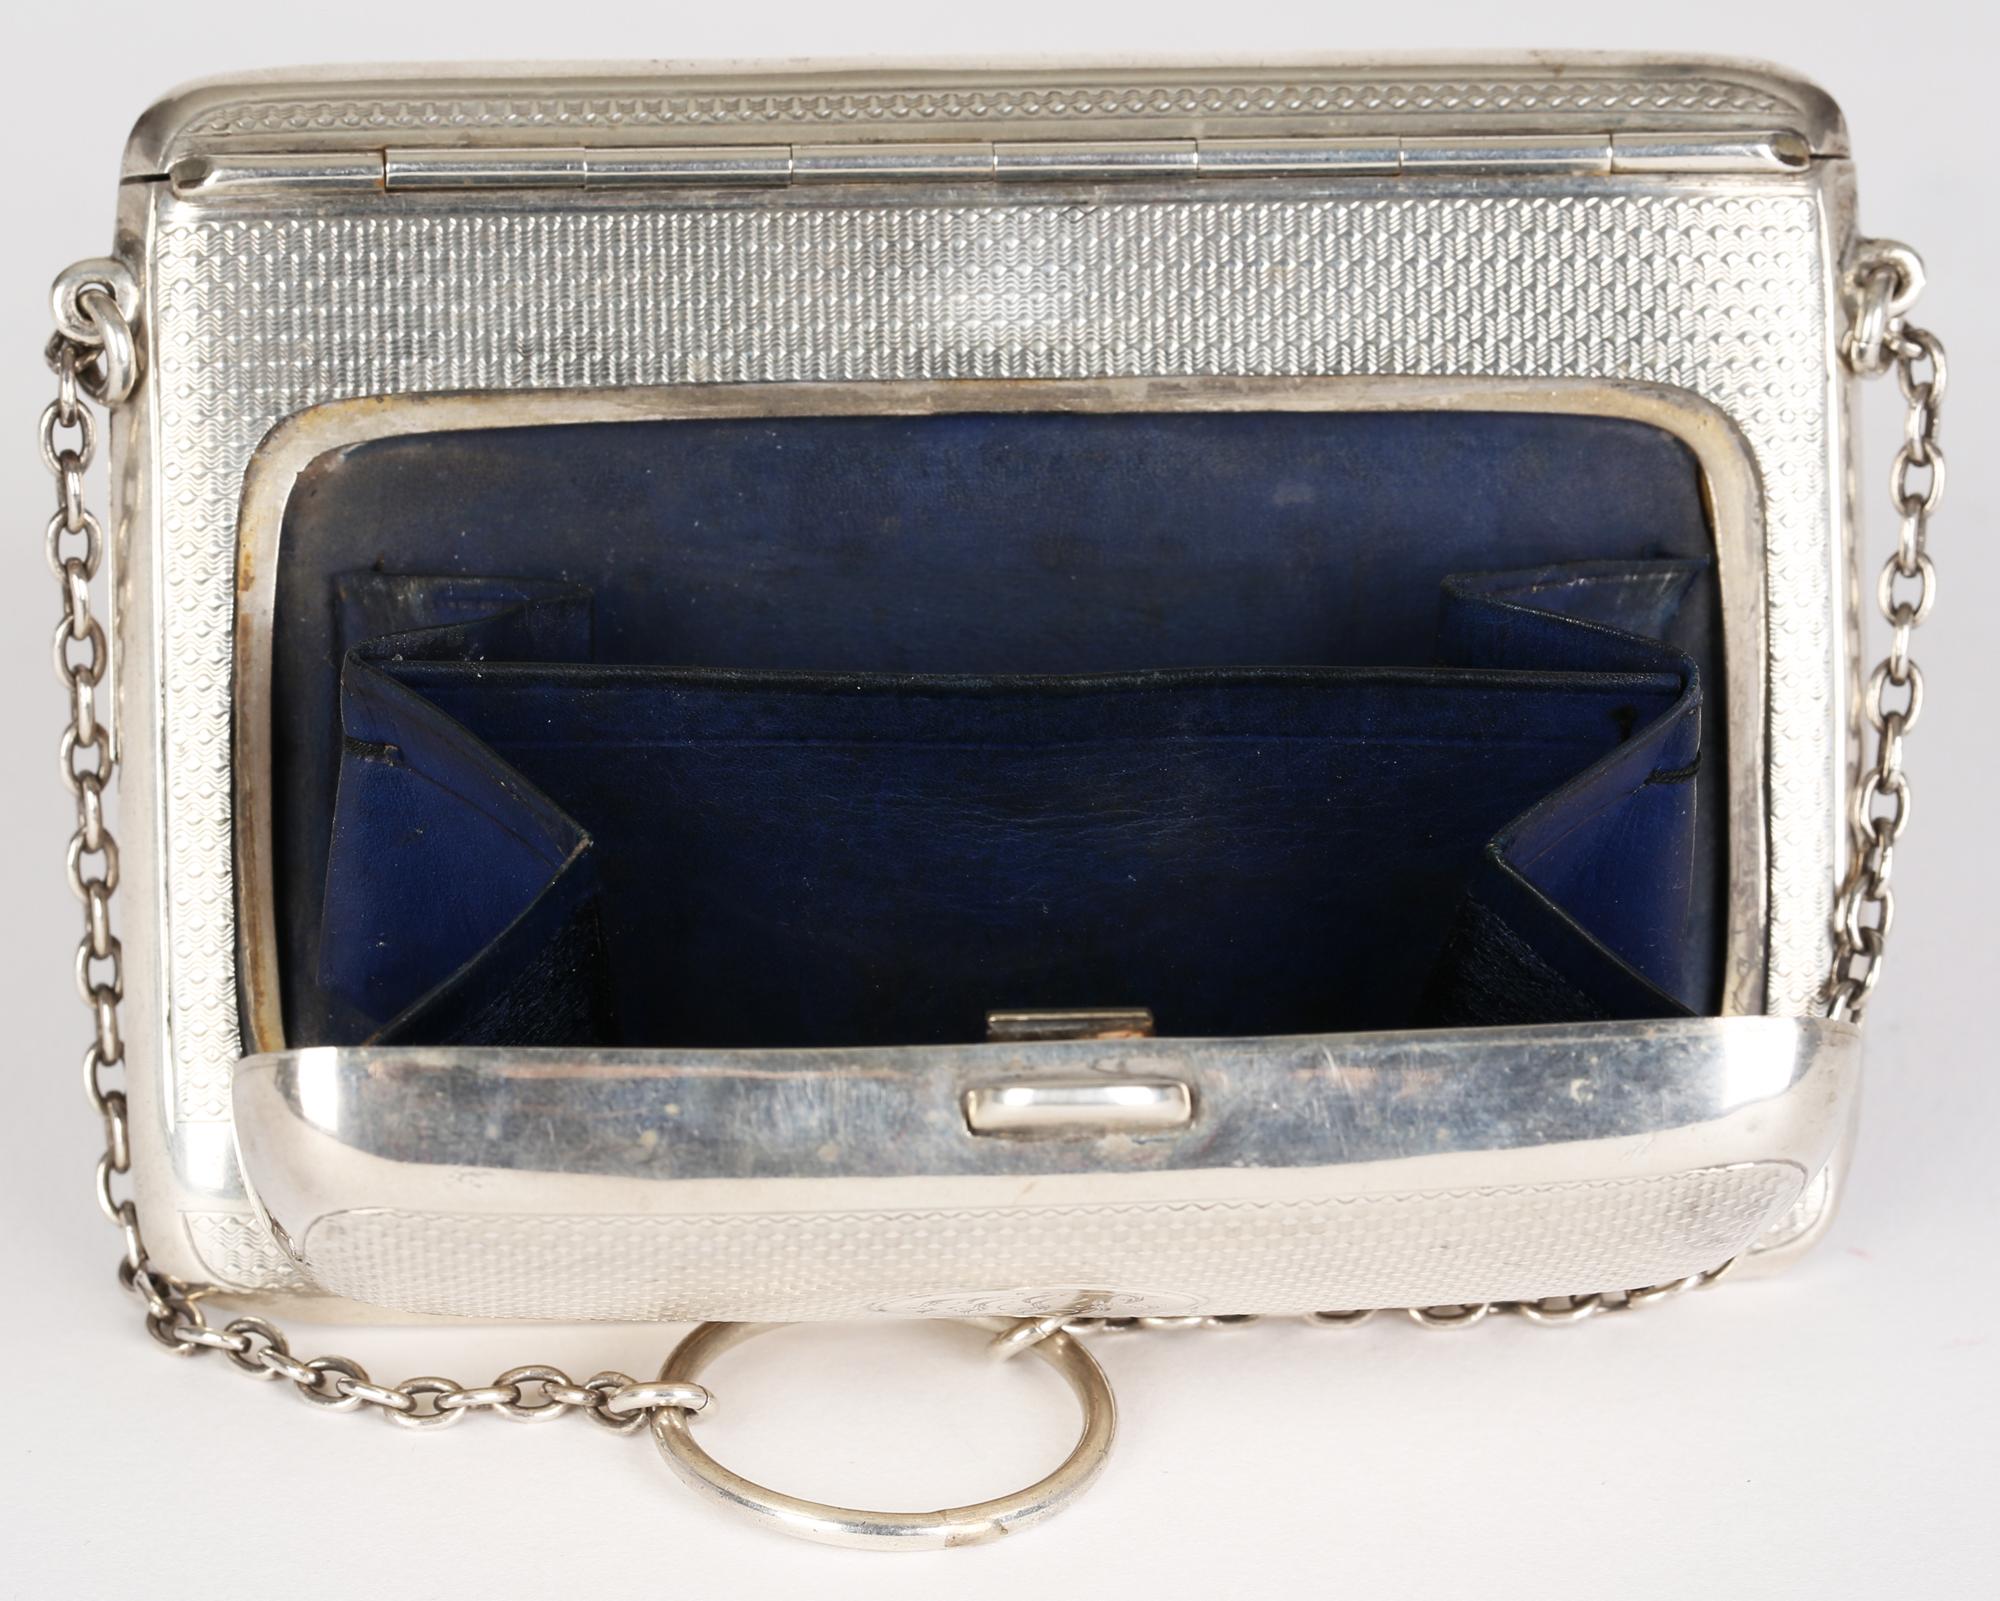 Early 20th Century Unusual Late Edwardian Birmingham Ladies Silver Combination Purse and Card Case